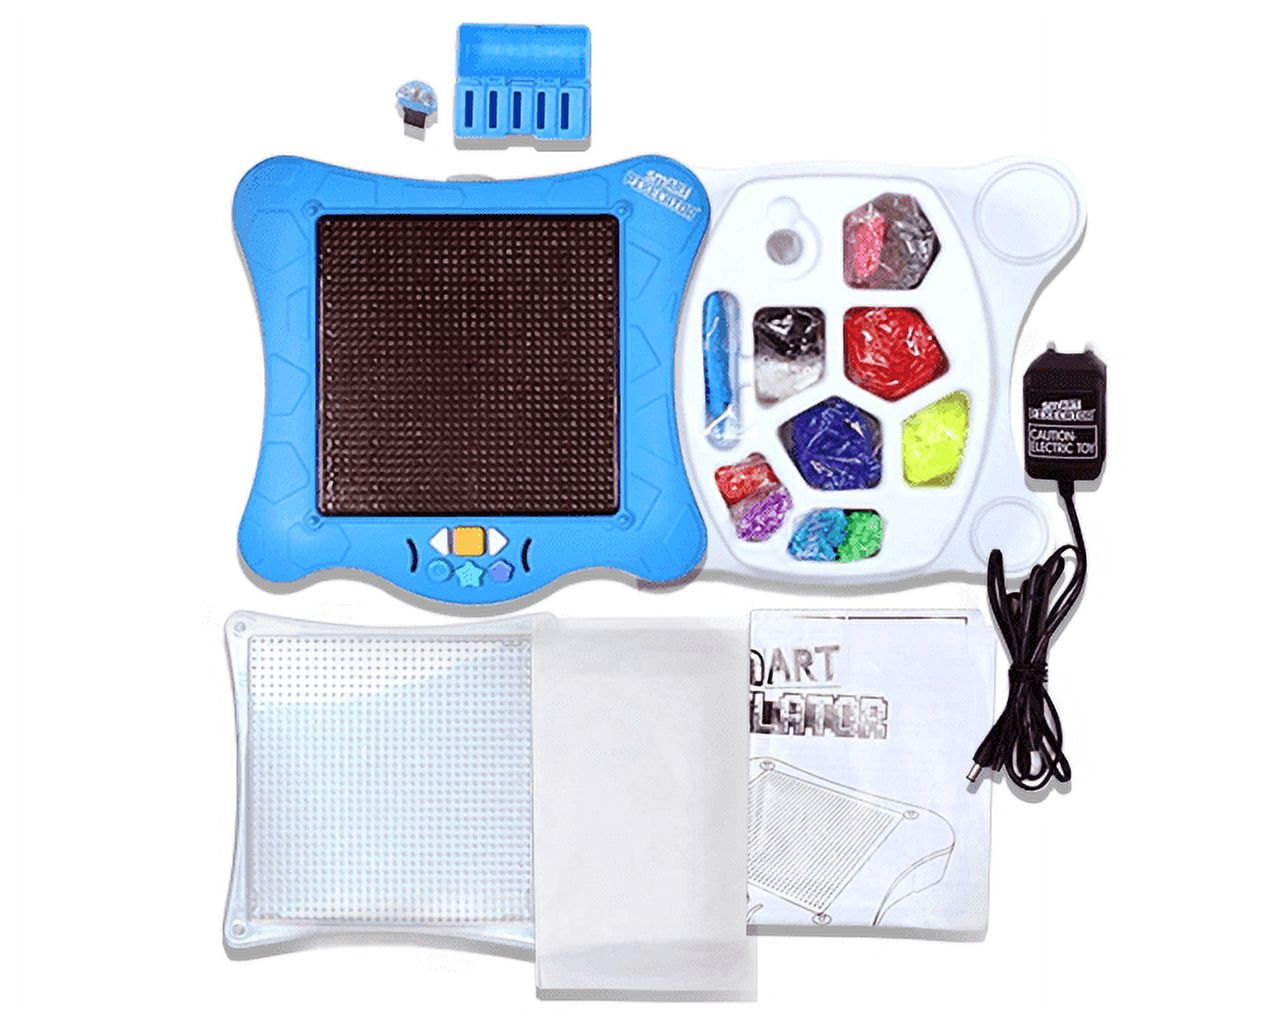 smART Pixelator: Create Your Own 3D Pixelated Art Projects, Gift for Kids, Ages 7+ - image 3 of 12